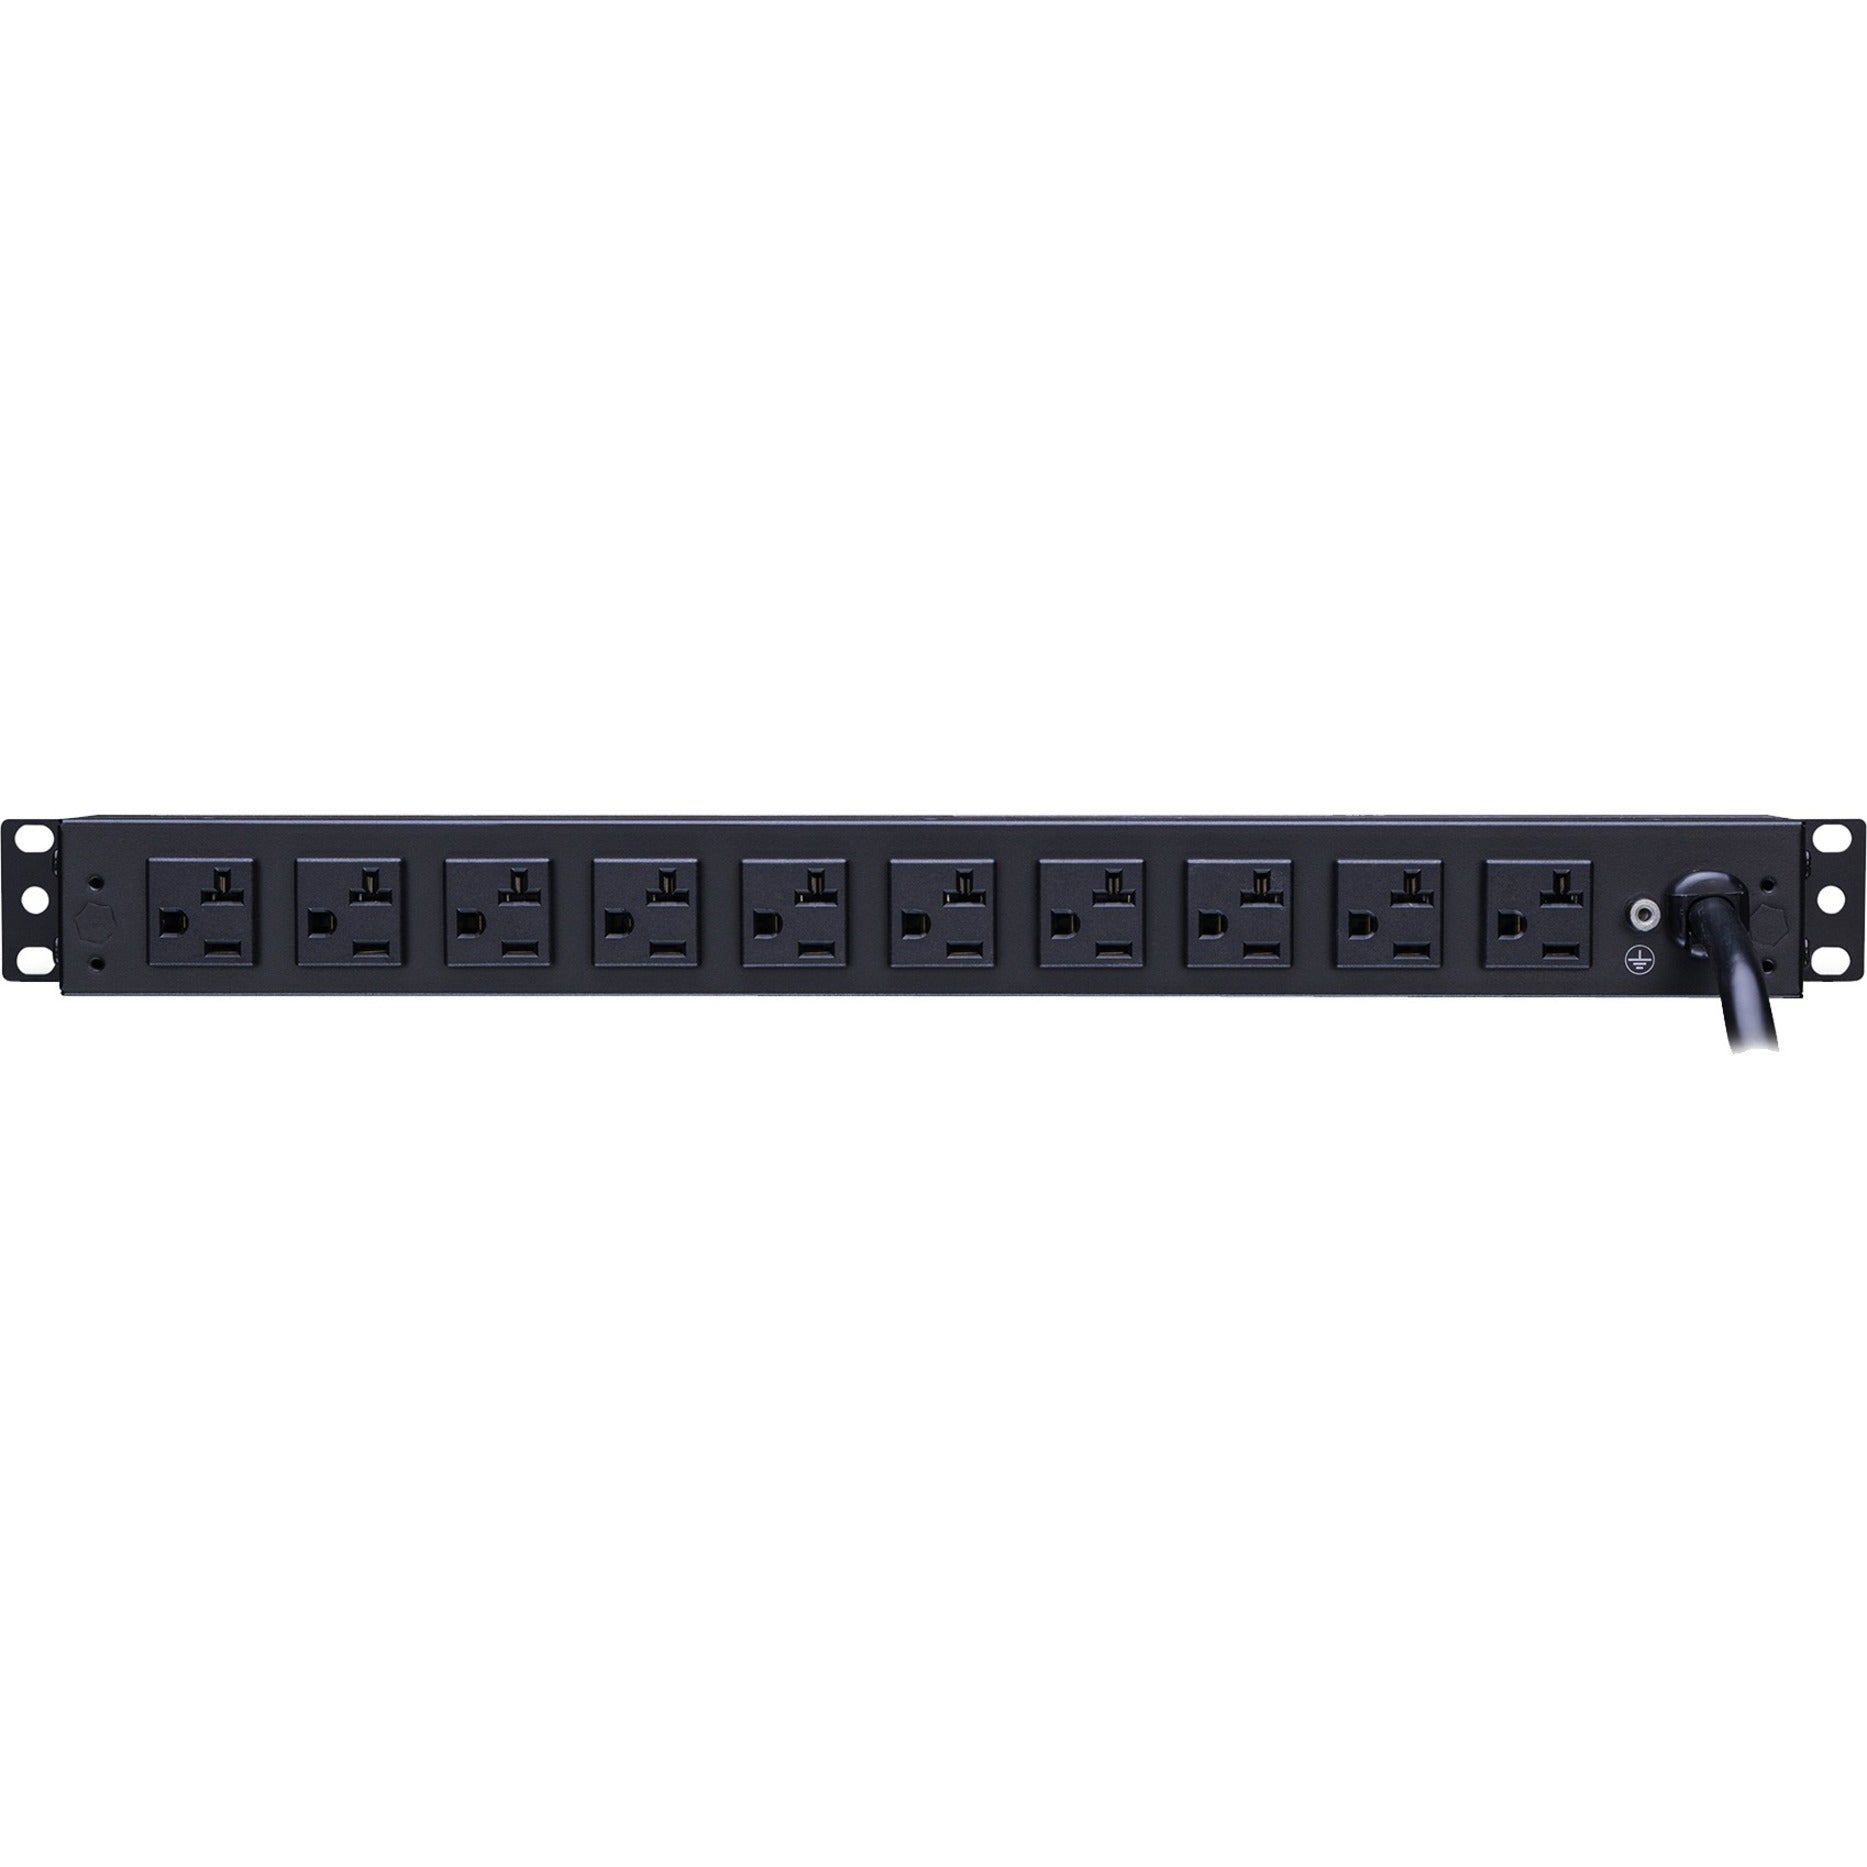 CyberPower PDU20MT2F10R Metered PDU 12-Outlets 20A 120V AC Rack-mountable